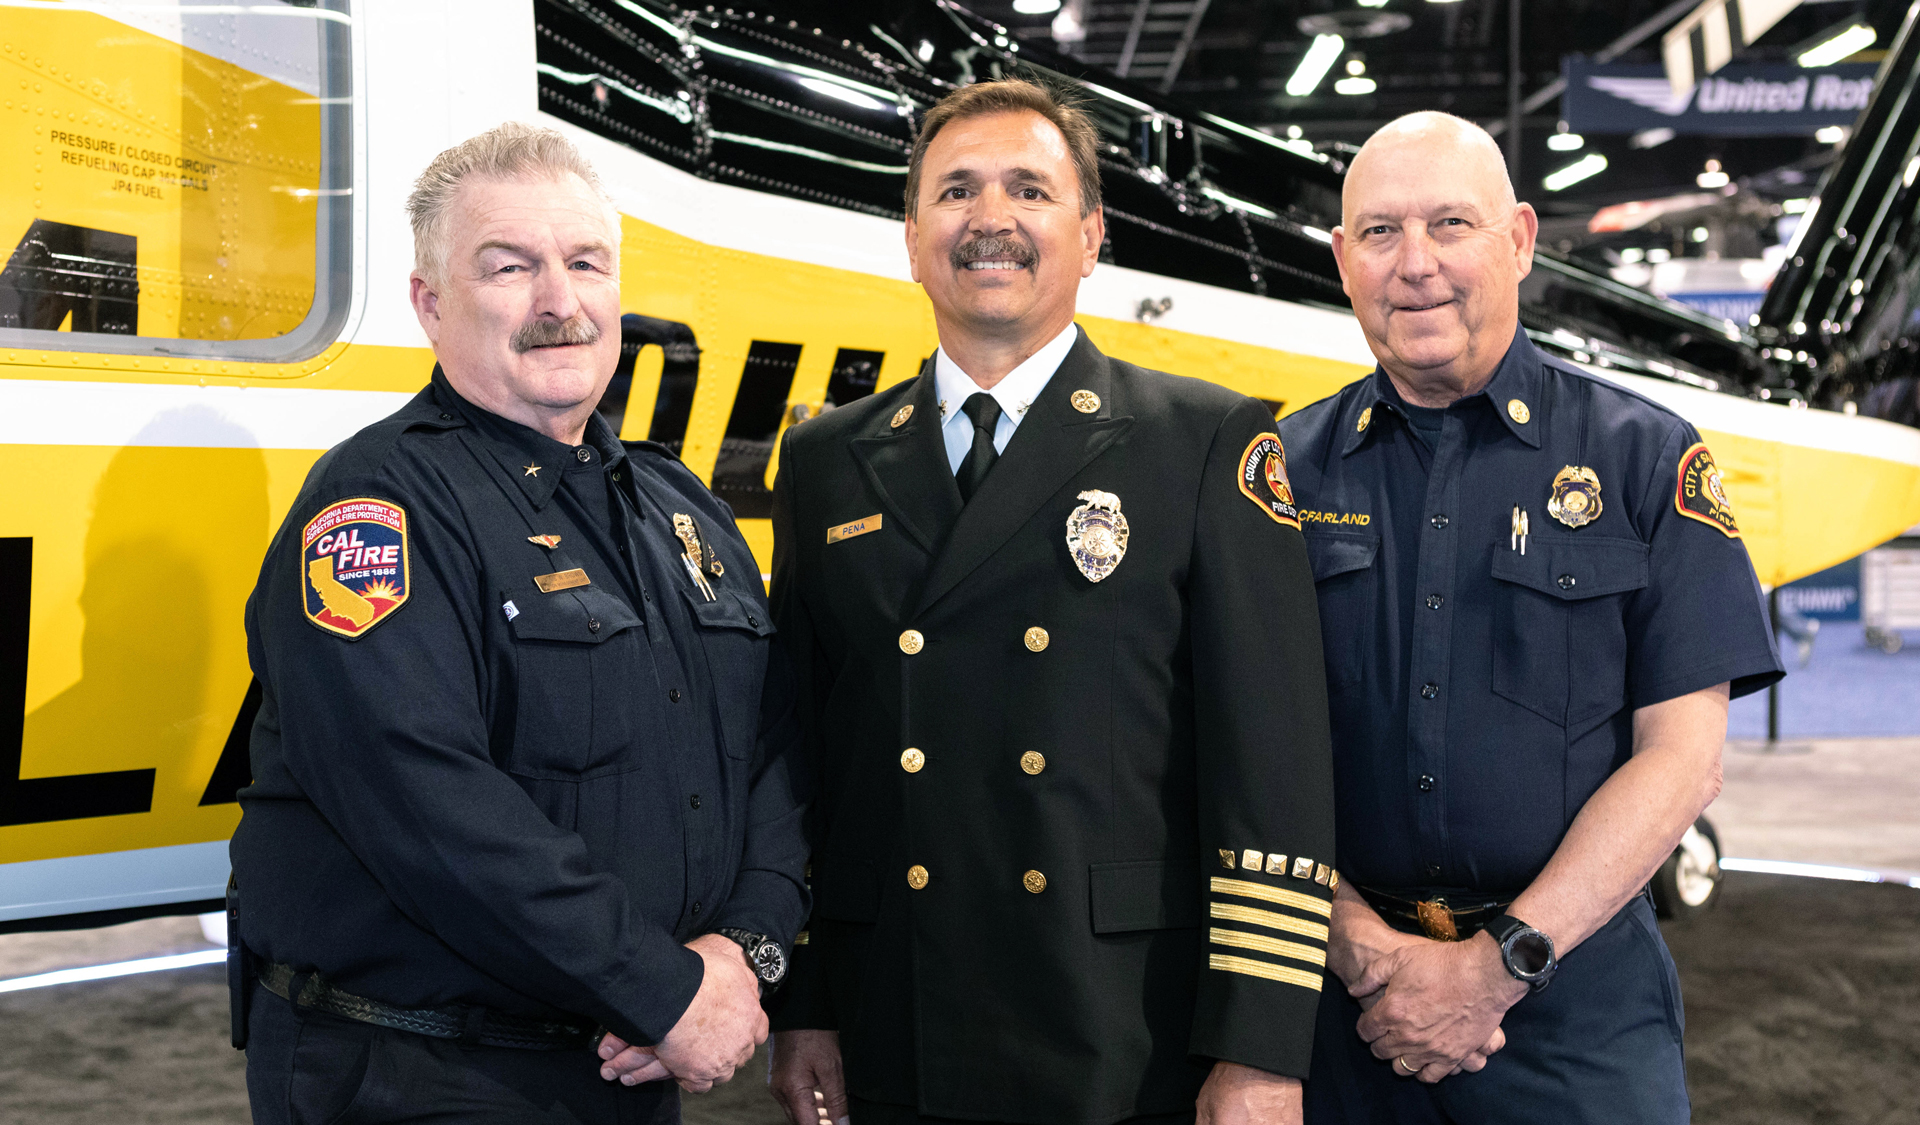 Firehawk Fire Chiefs: Chief Dennis Brown of CAL FIRE, Deputy Chief Vince Pena of Los Angeles County and Chief Chuck Macfarland of San Diego Fire-Rescue spoke and were recognized for their choosing the Sikorsky S-70i™ FIREHAWK® helicopter.